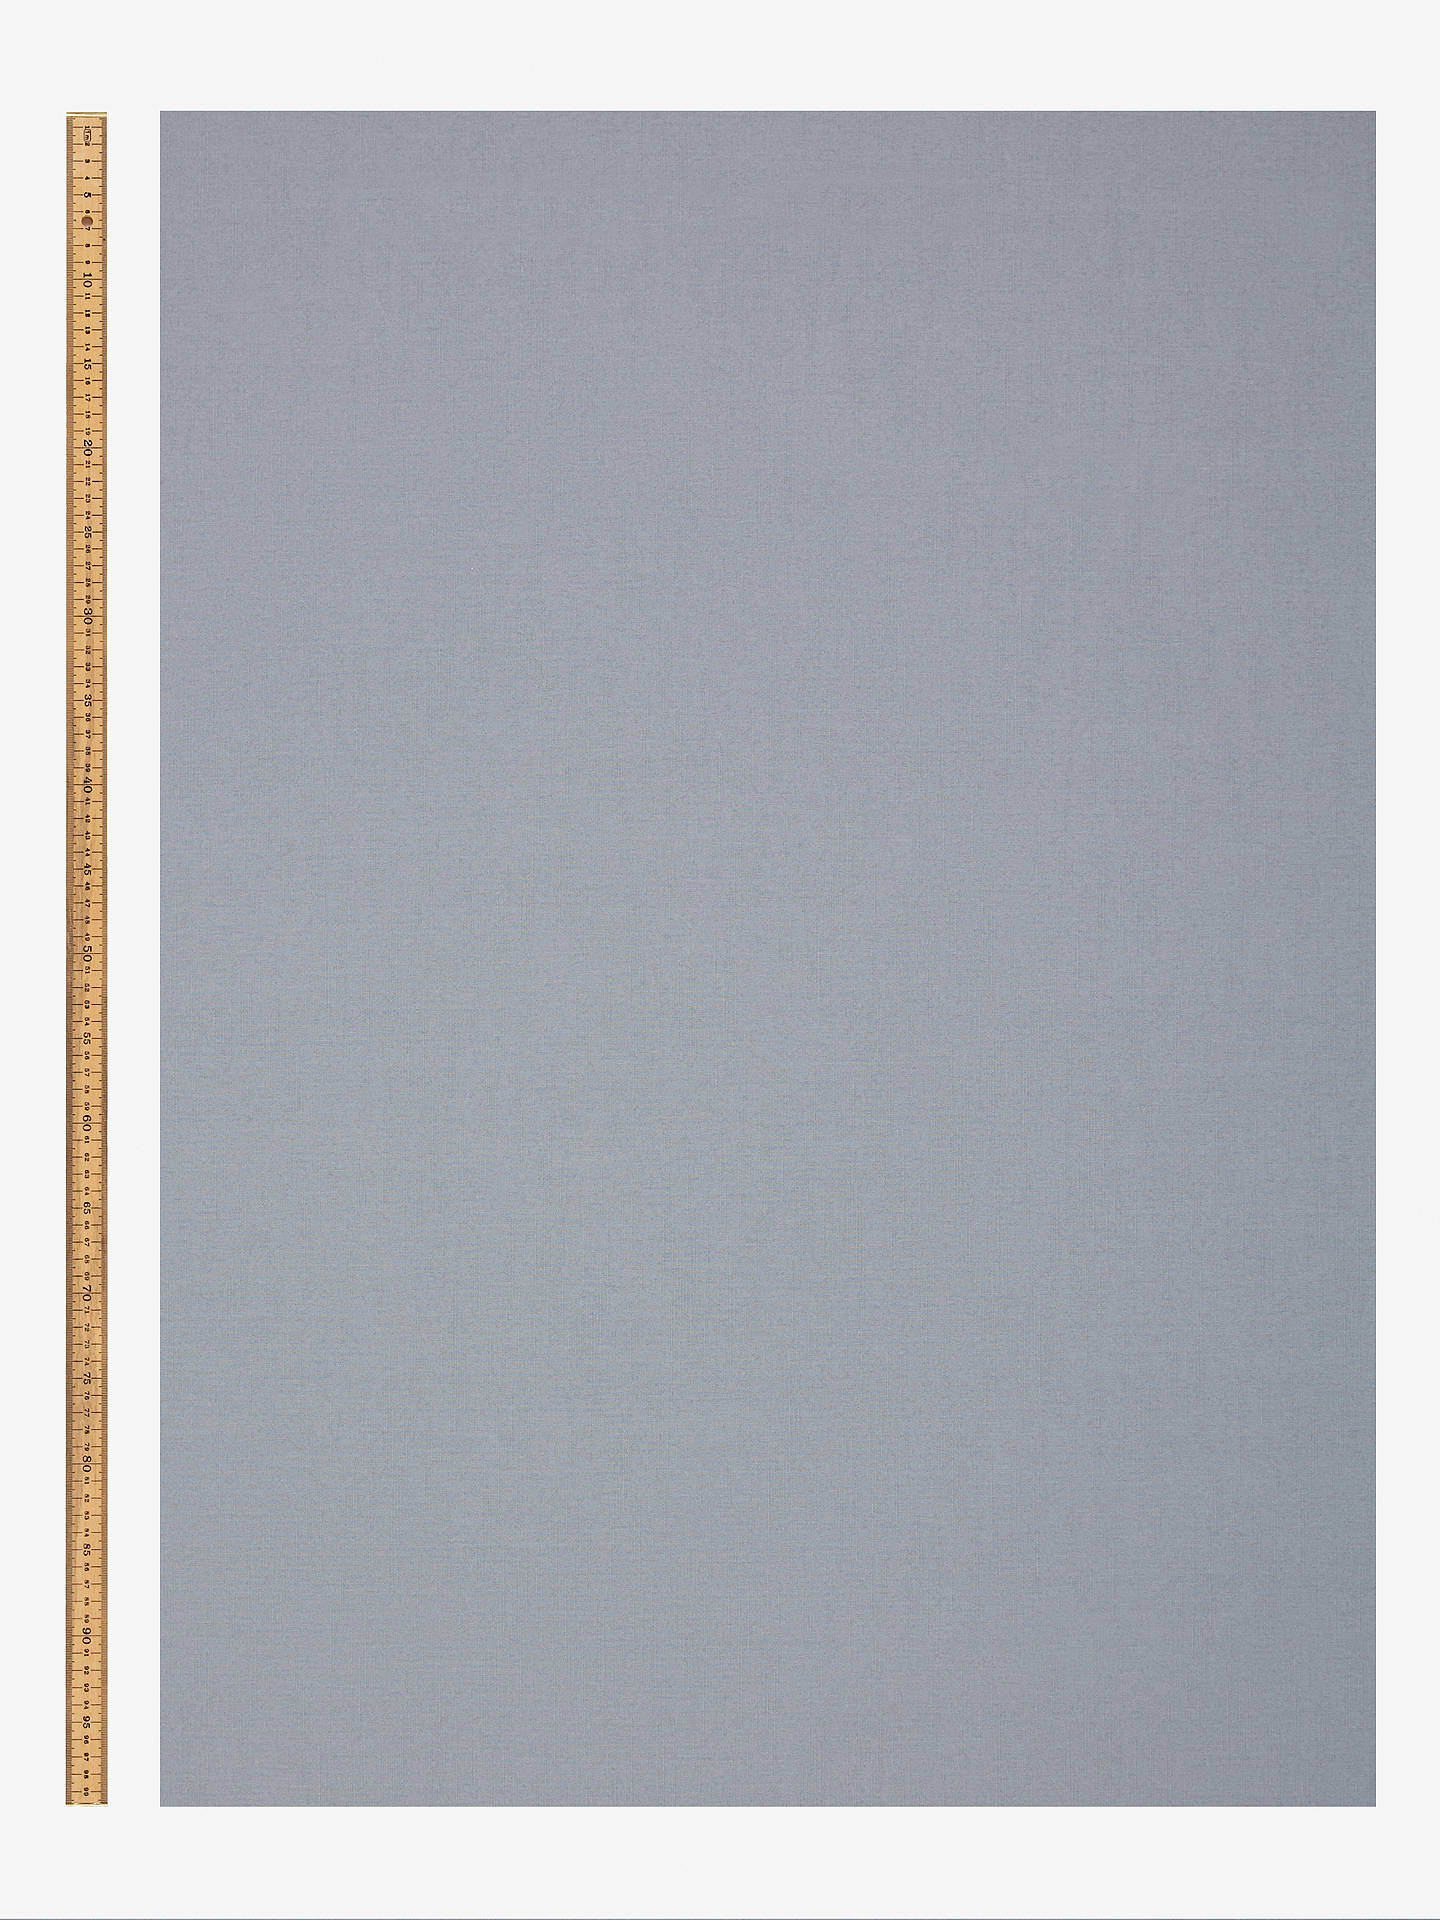 John Lewis Lima Made to Measure Blackout Roller Blind, Cloudy Blue